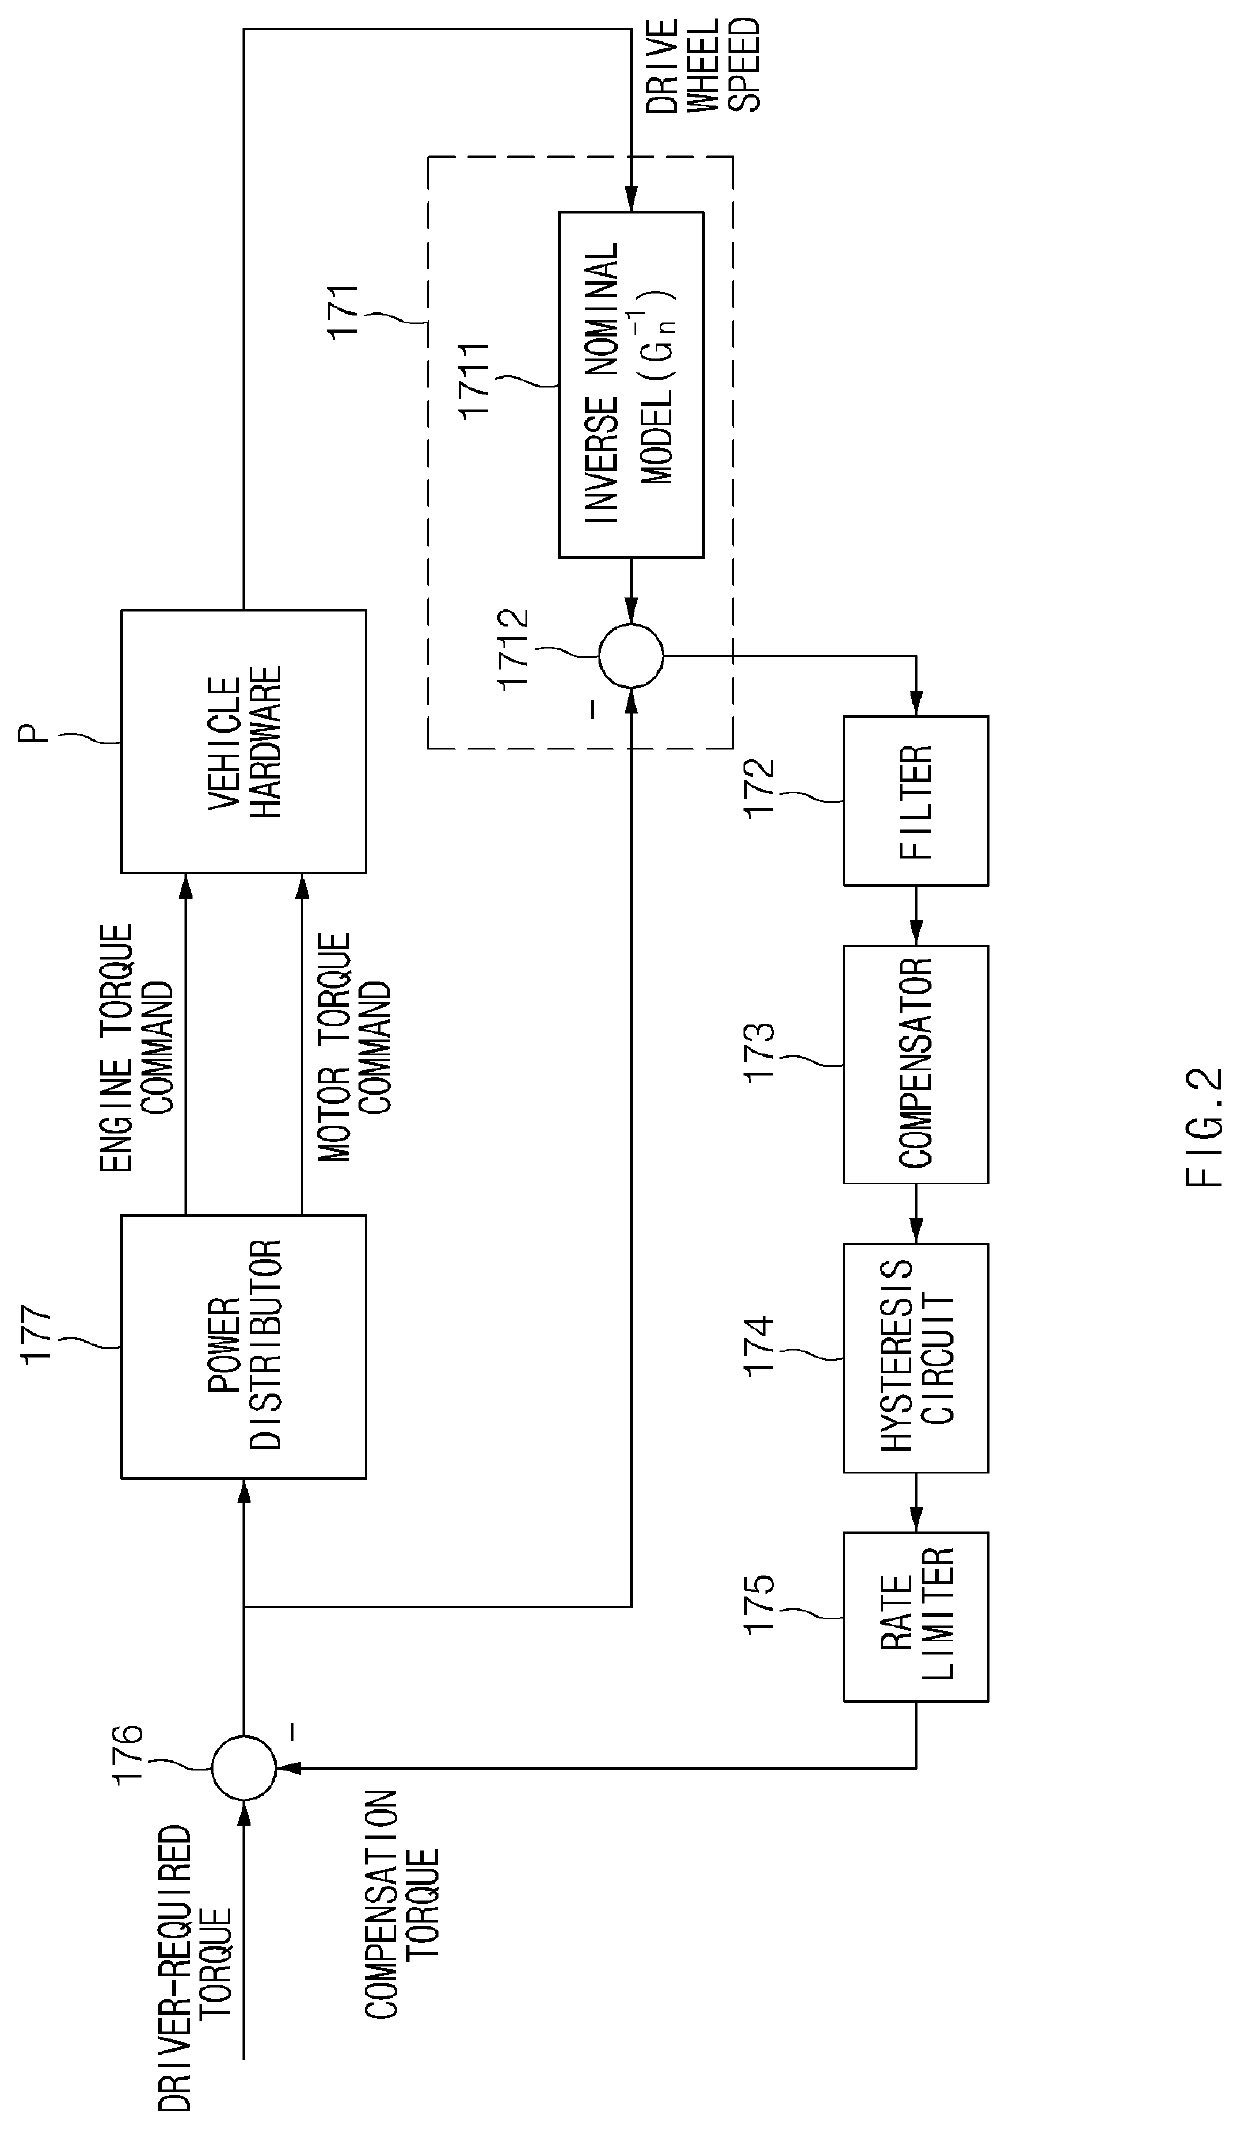 System and method for controlling traction force of electrified vehicle